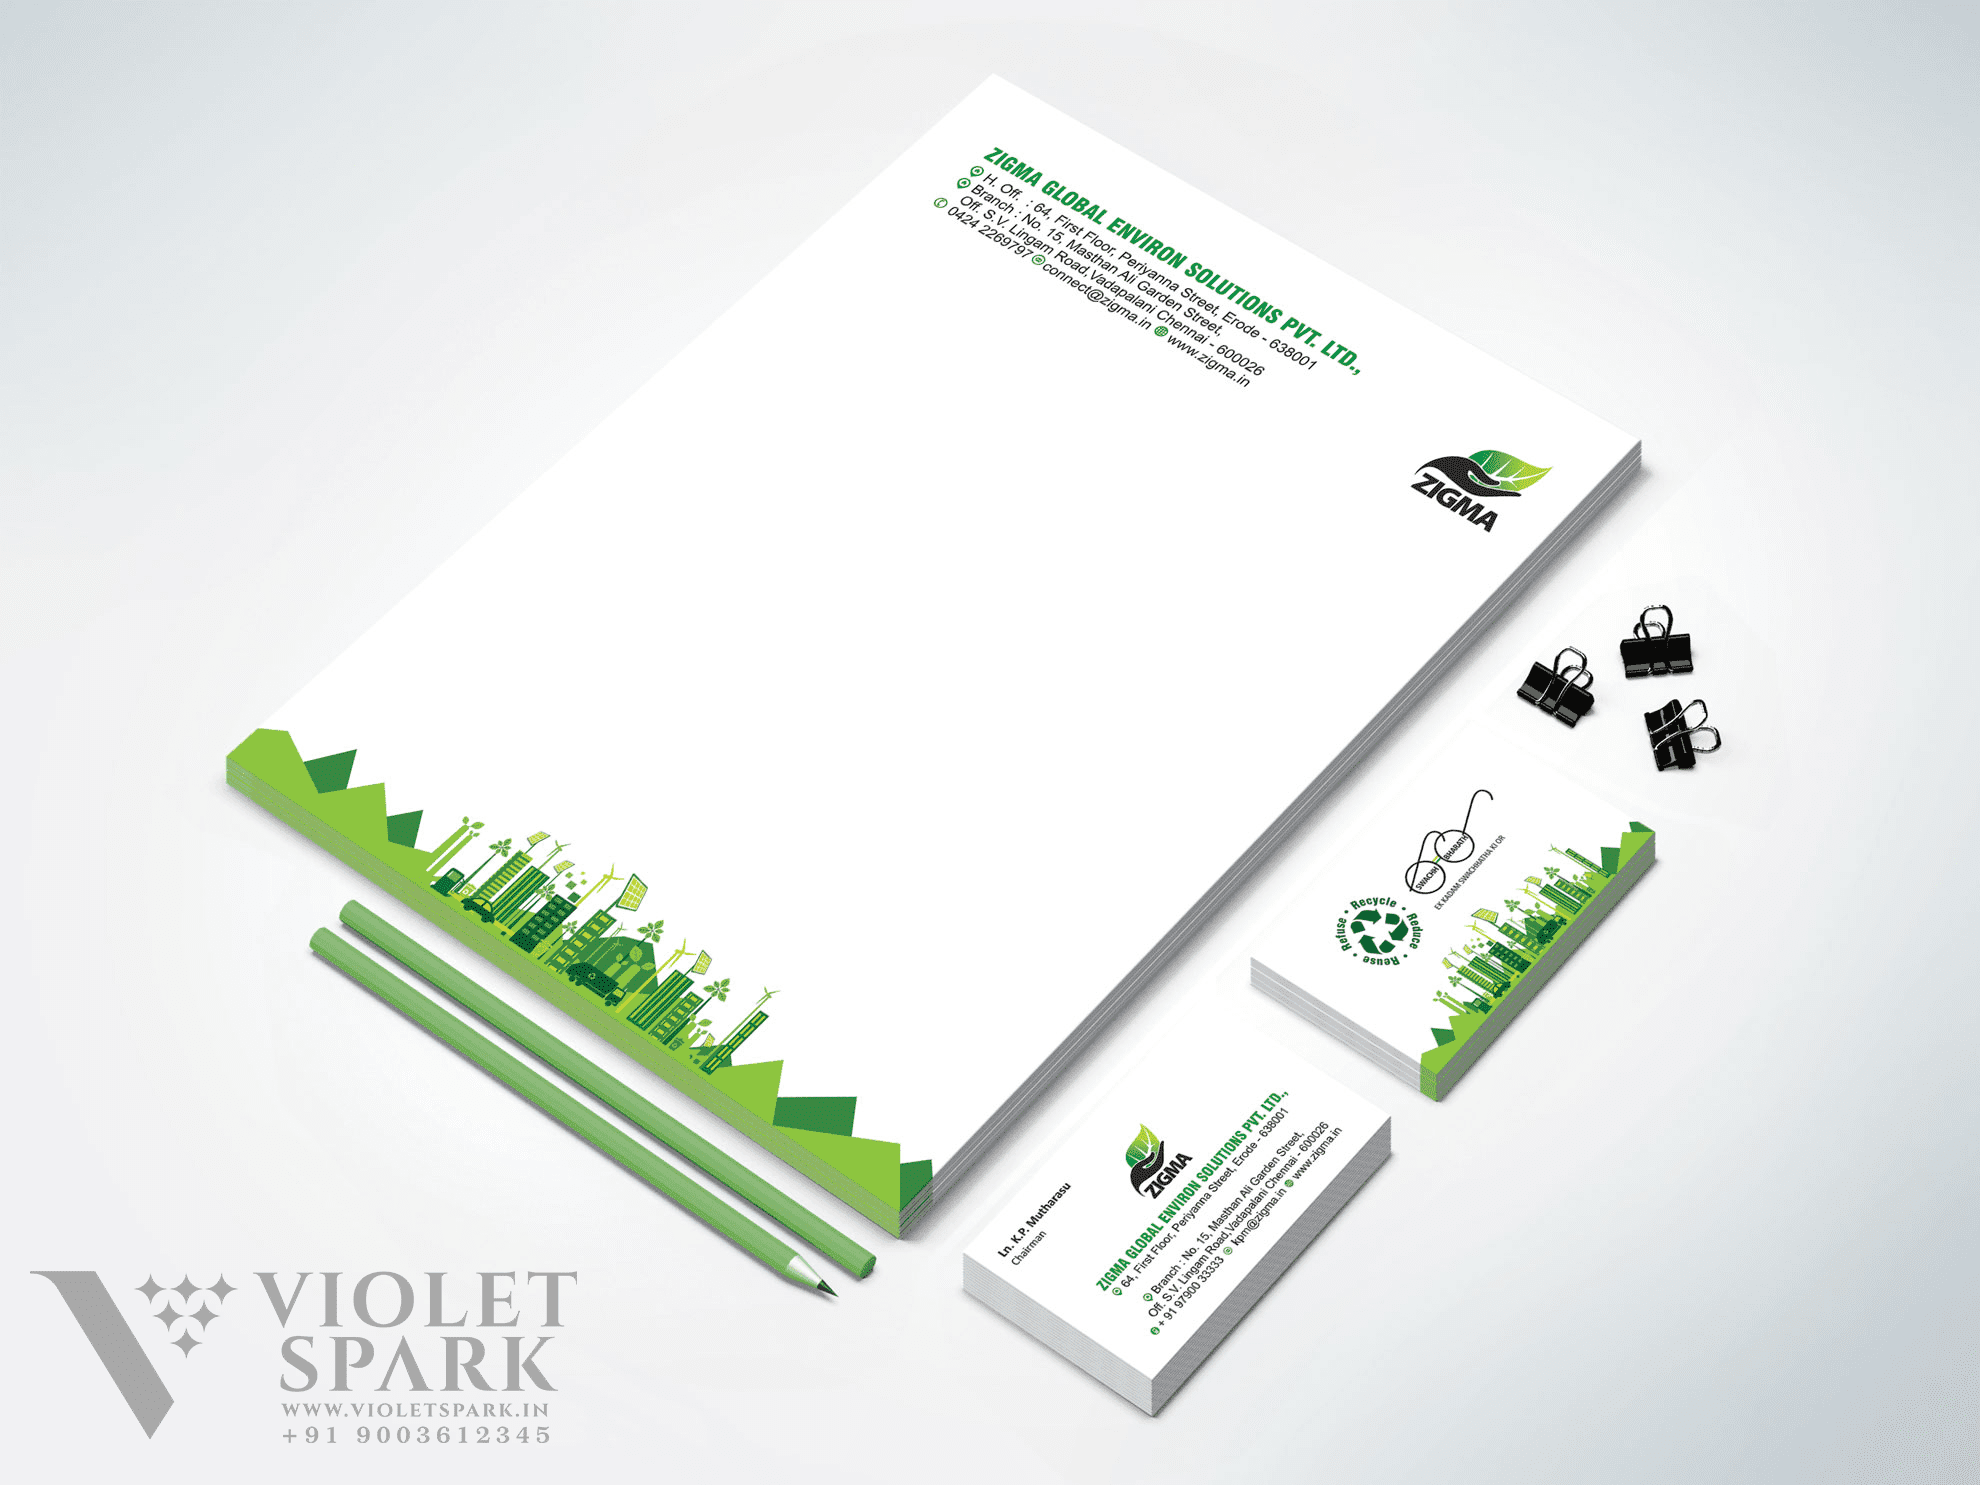 Zigma Global Environ Solutions Pvt Ltd Stationary Set Branding & Packaging Design in Chennai by Creative Prints thecreativeprints